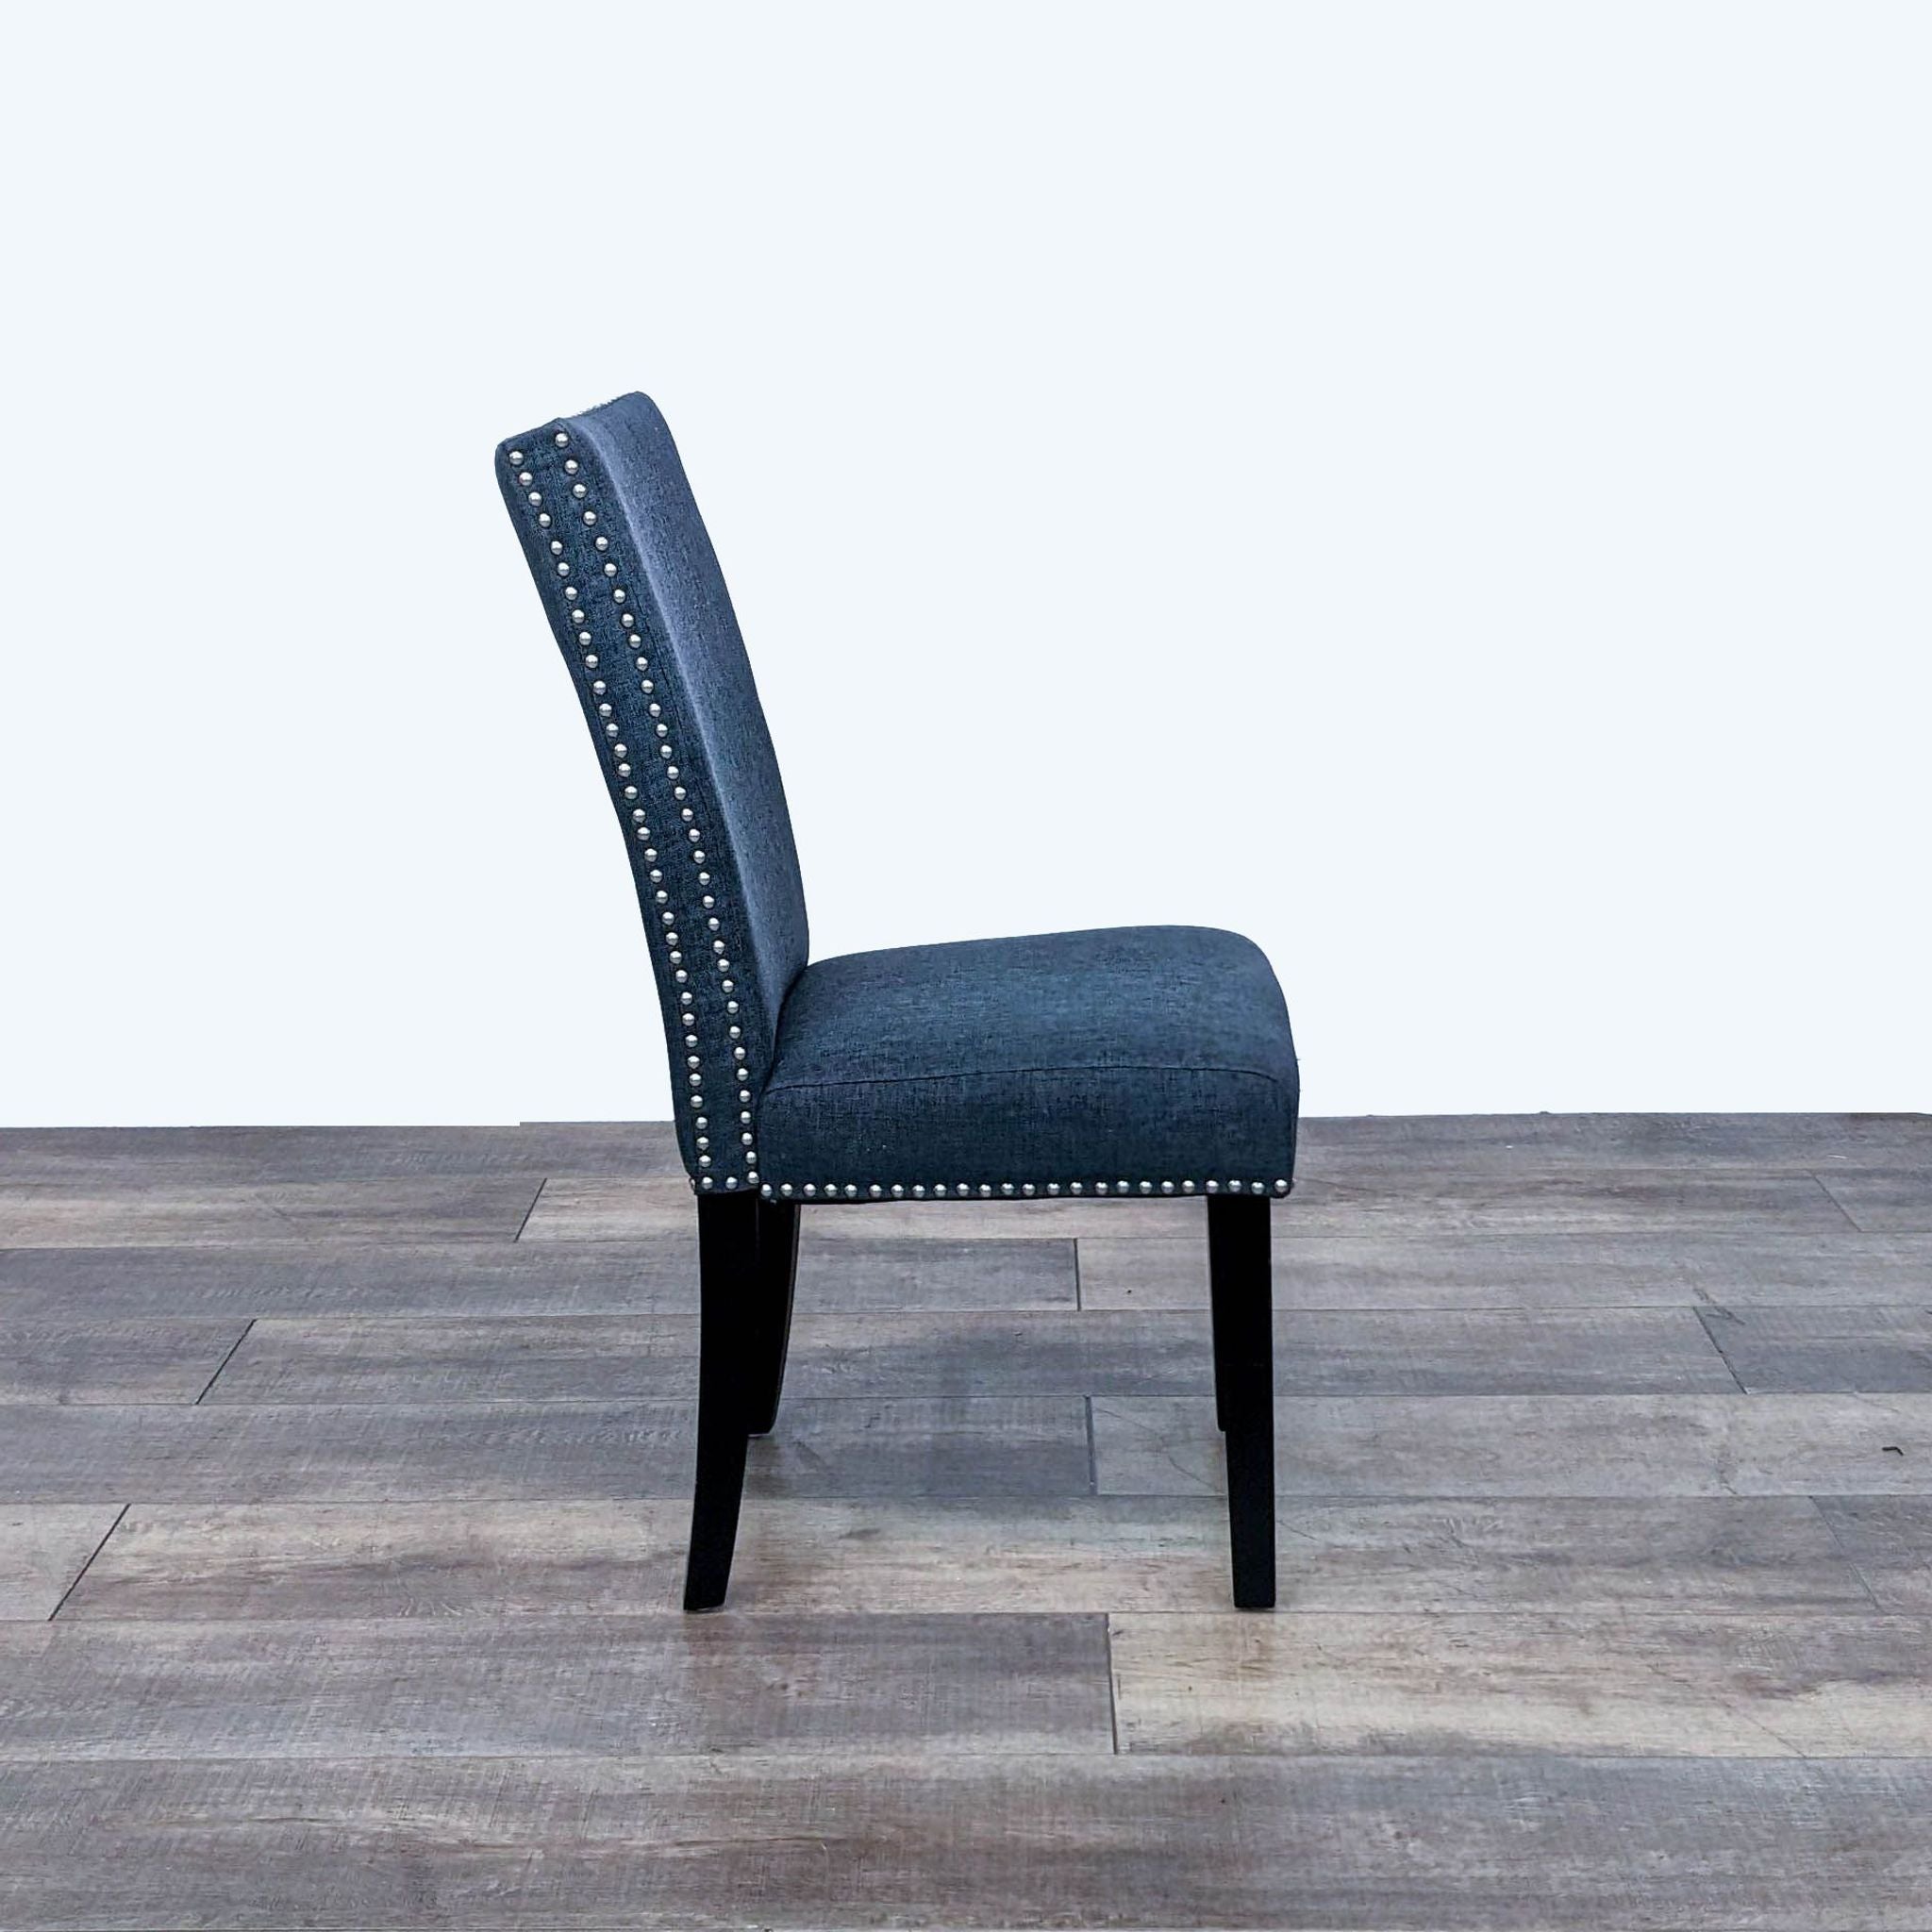 Reperch contemporary dining chair, side view, showcasing blue fabric, silver nailhead detailing, and espresso legs.